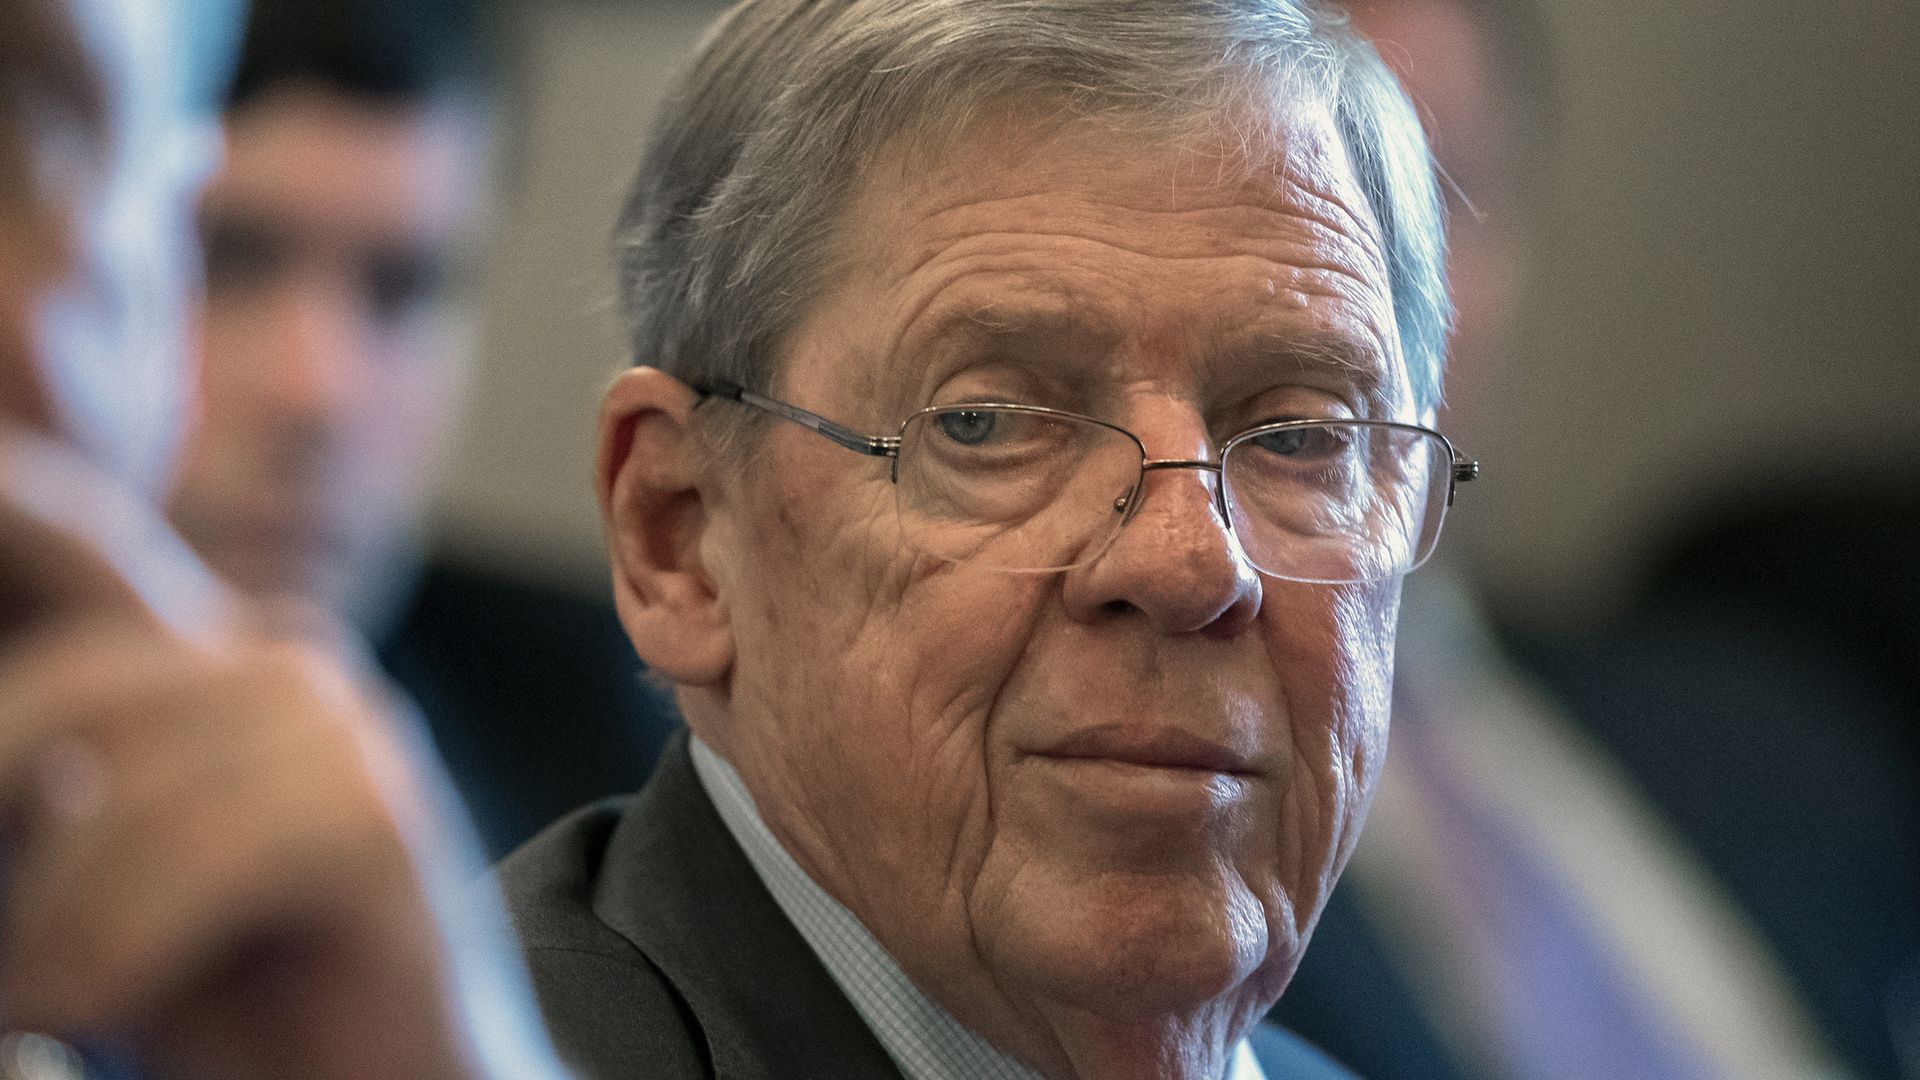 Johnny Isakson sits in a meeting and looks toward the camera